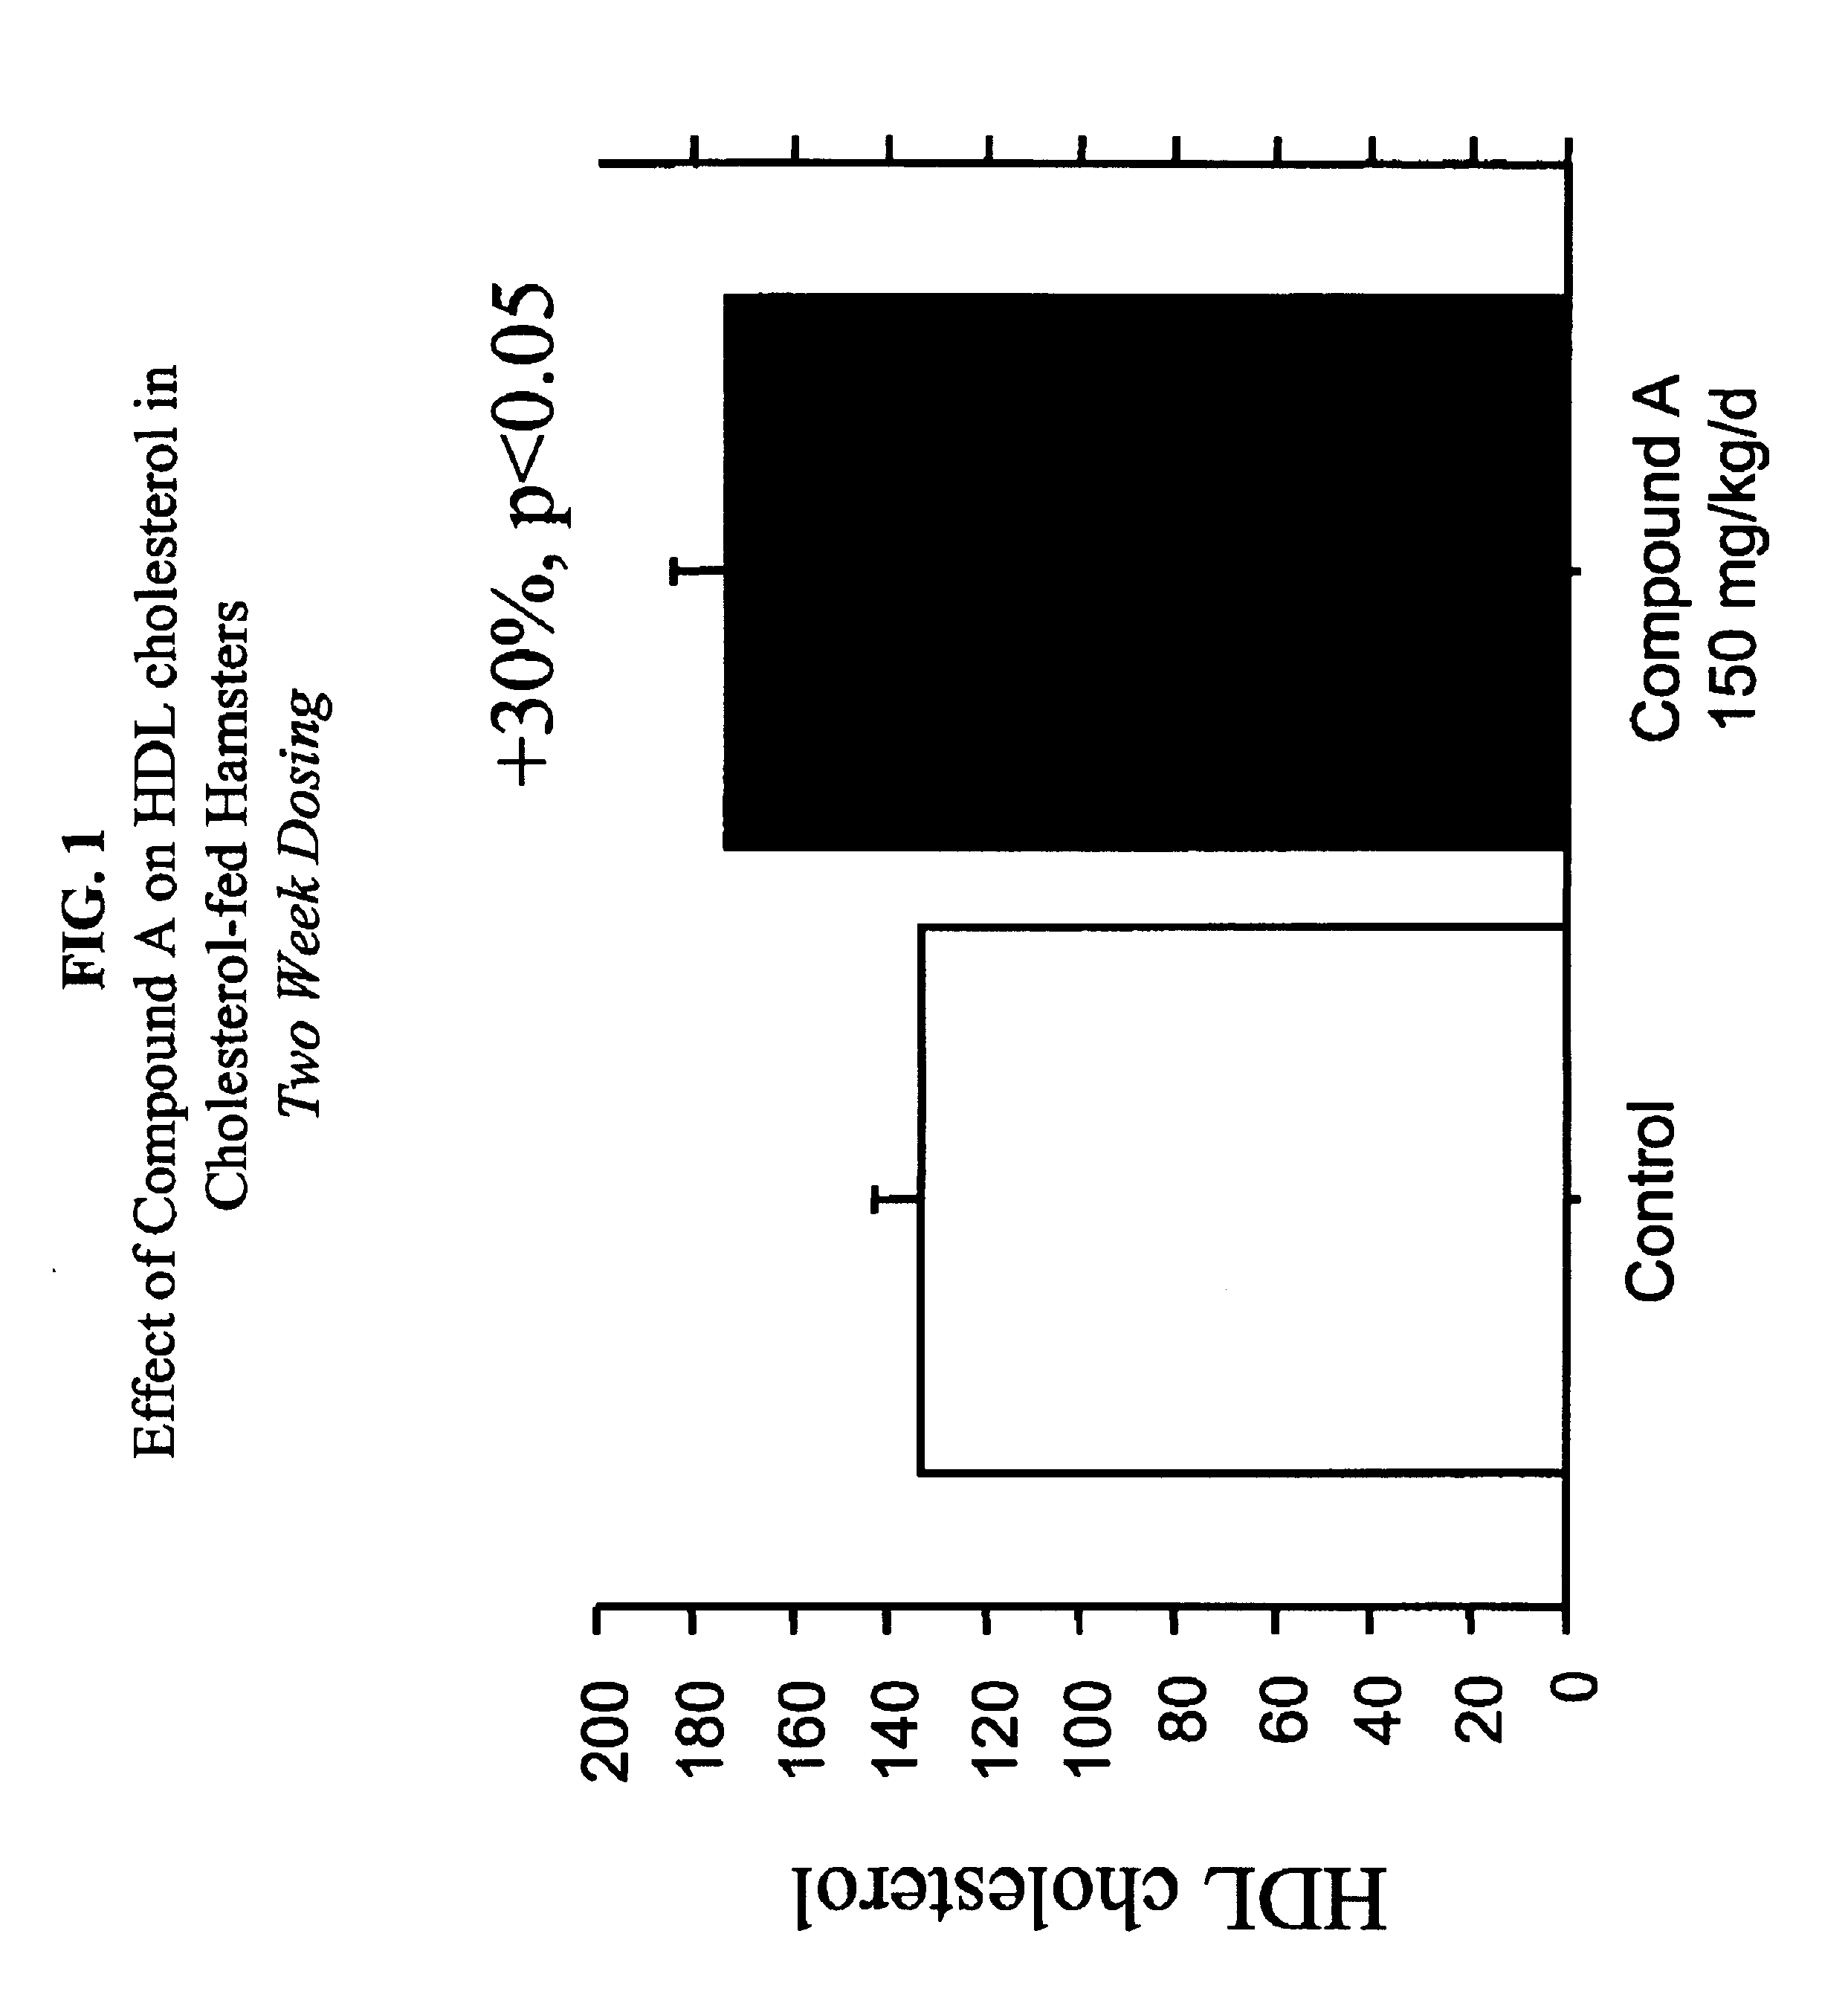 Compounds and methods to increase plasma HDL cholesterol levels and improve HDL functionality